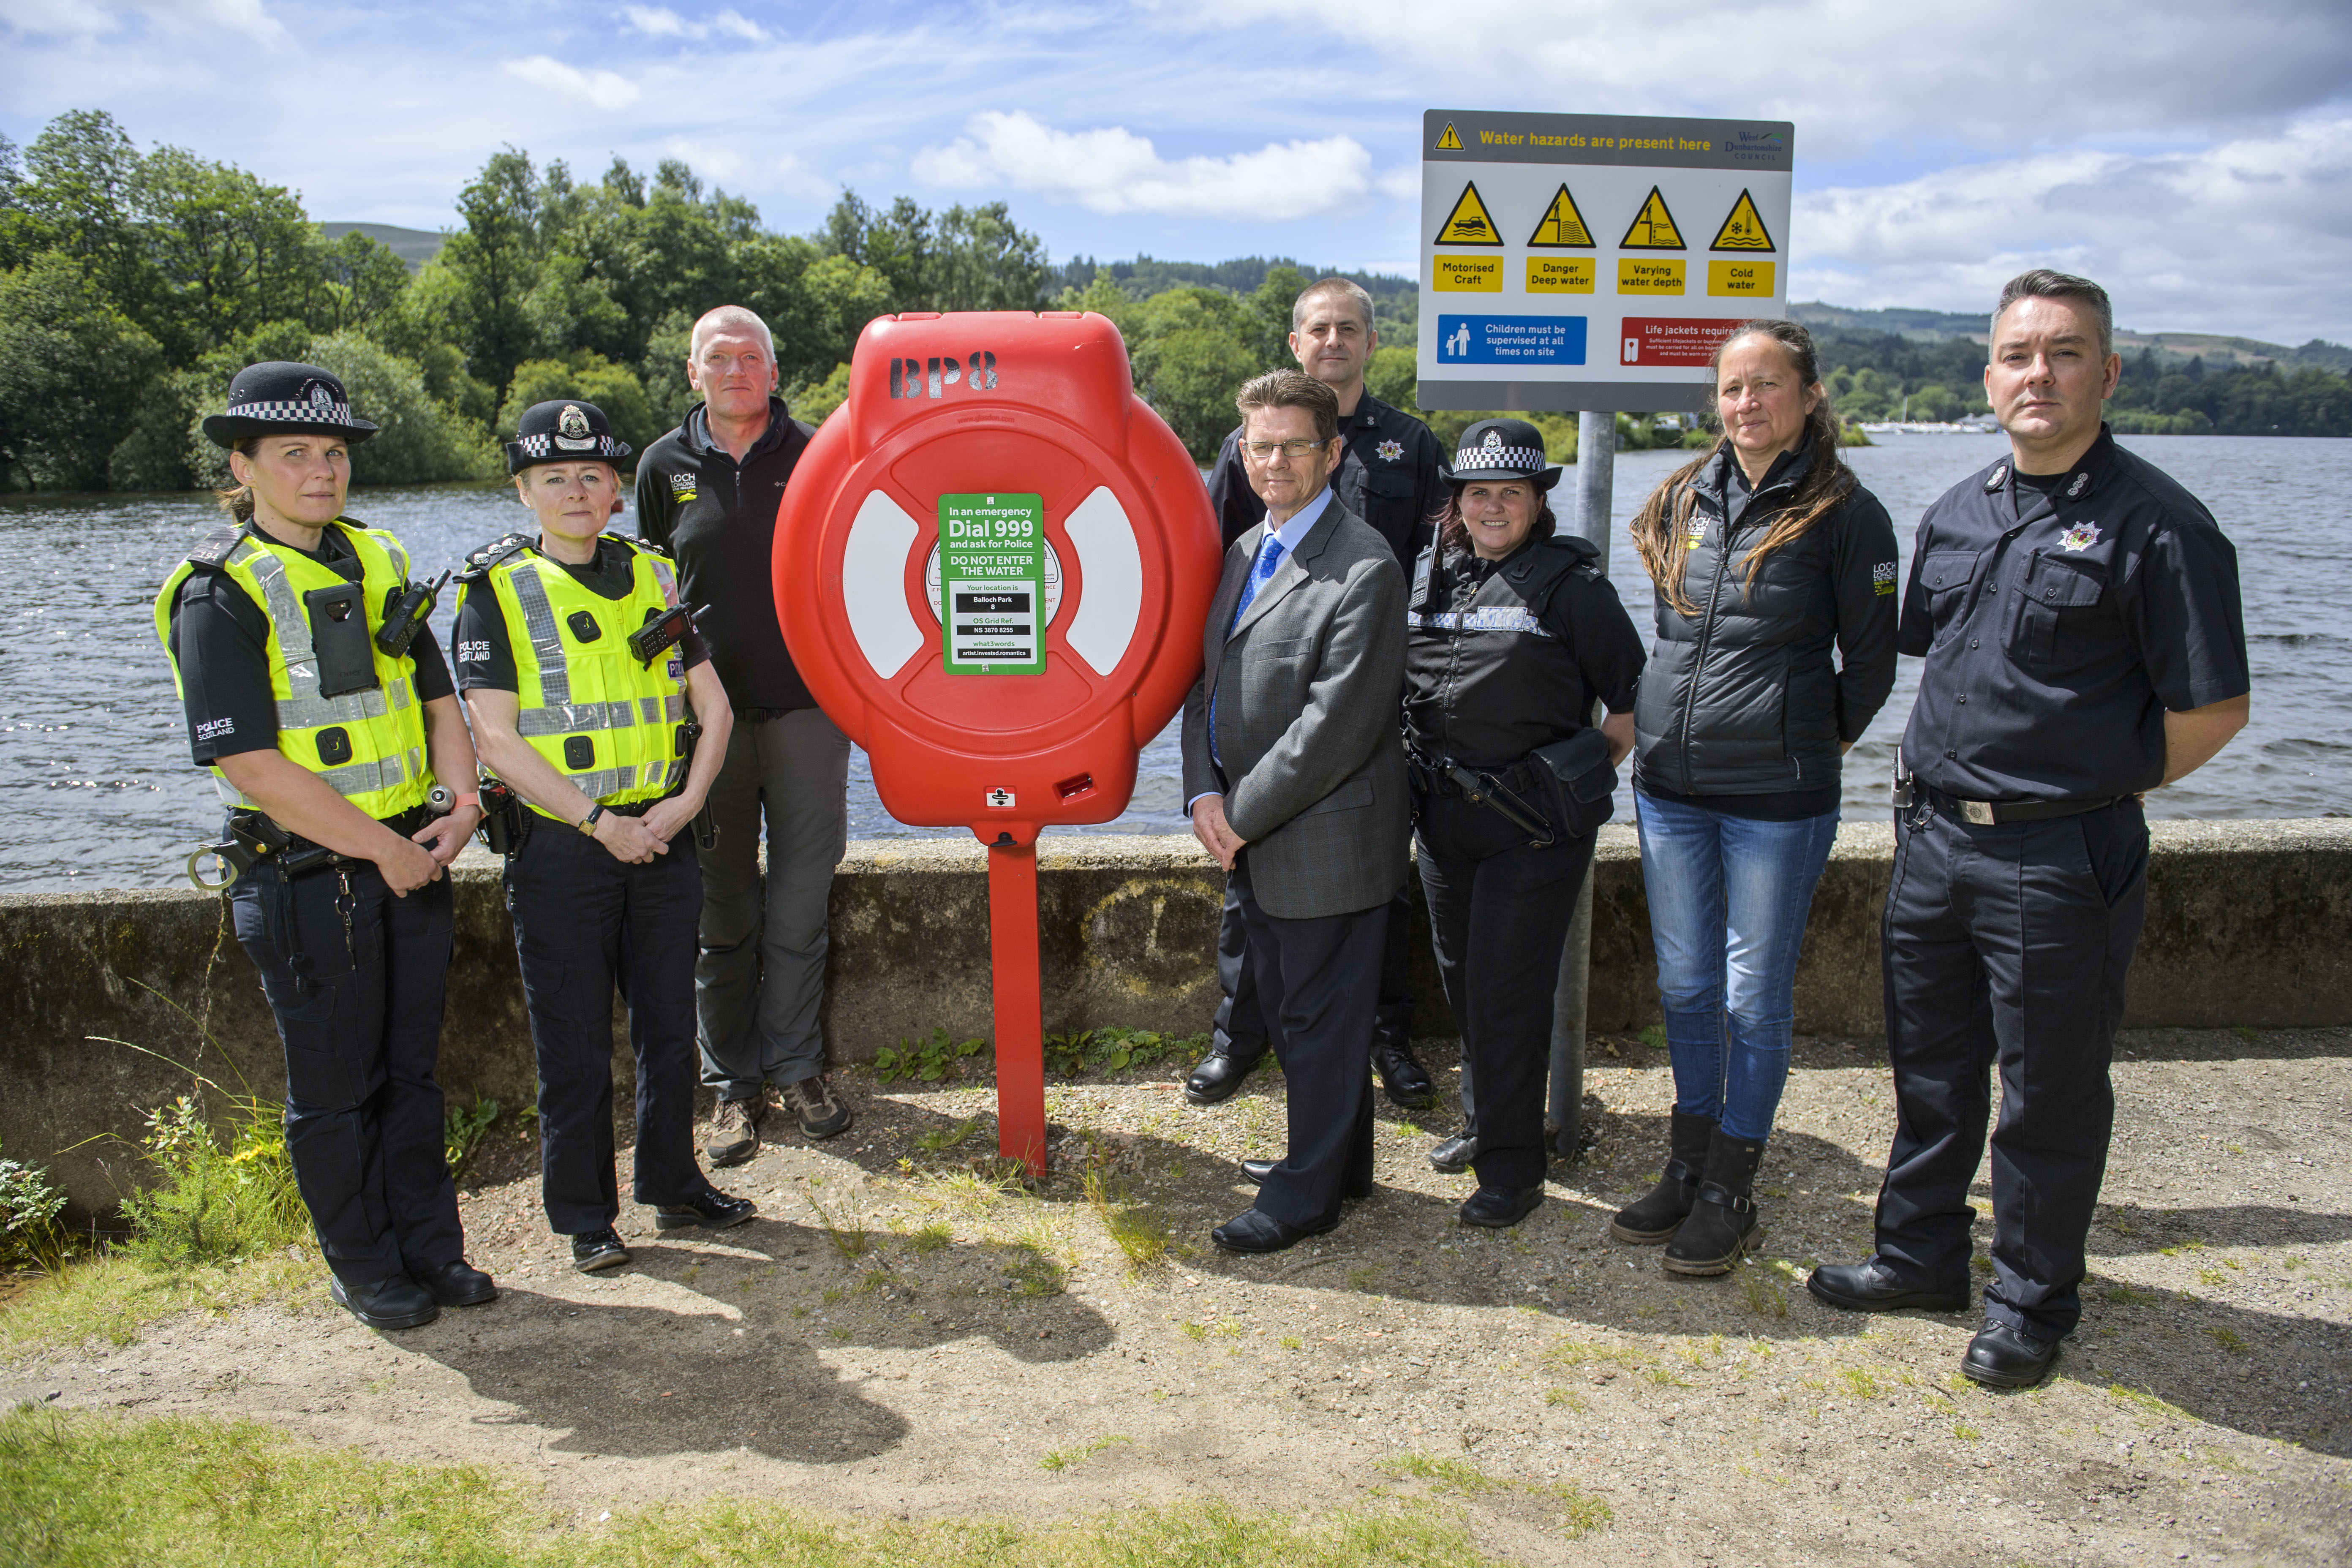 Water safety initiative given nationwide rollout